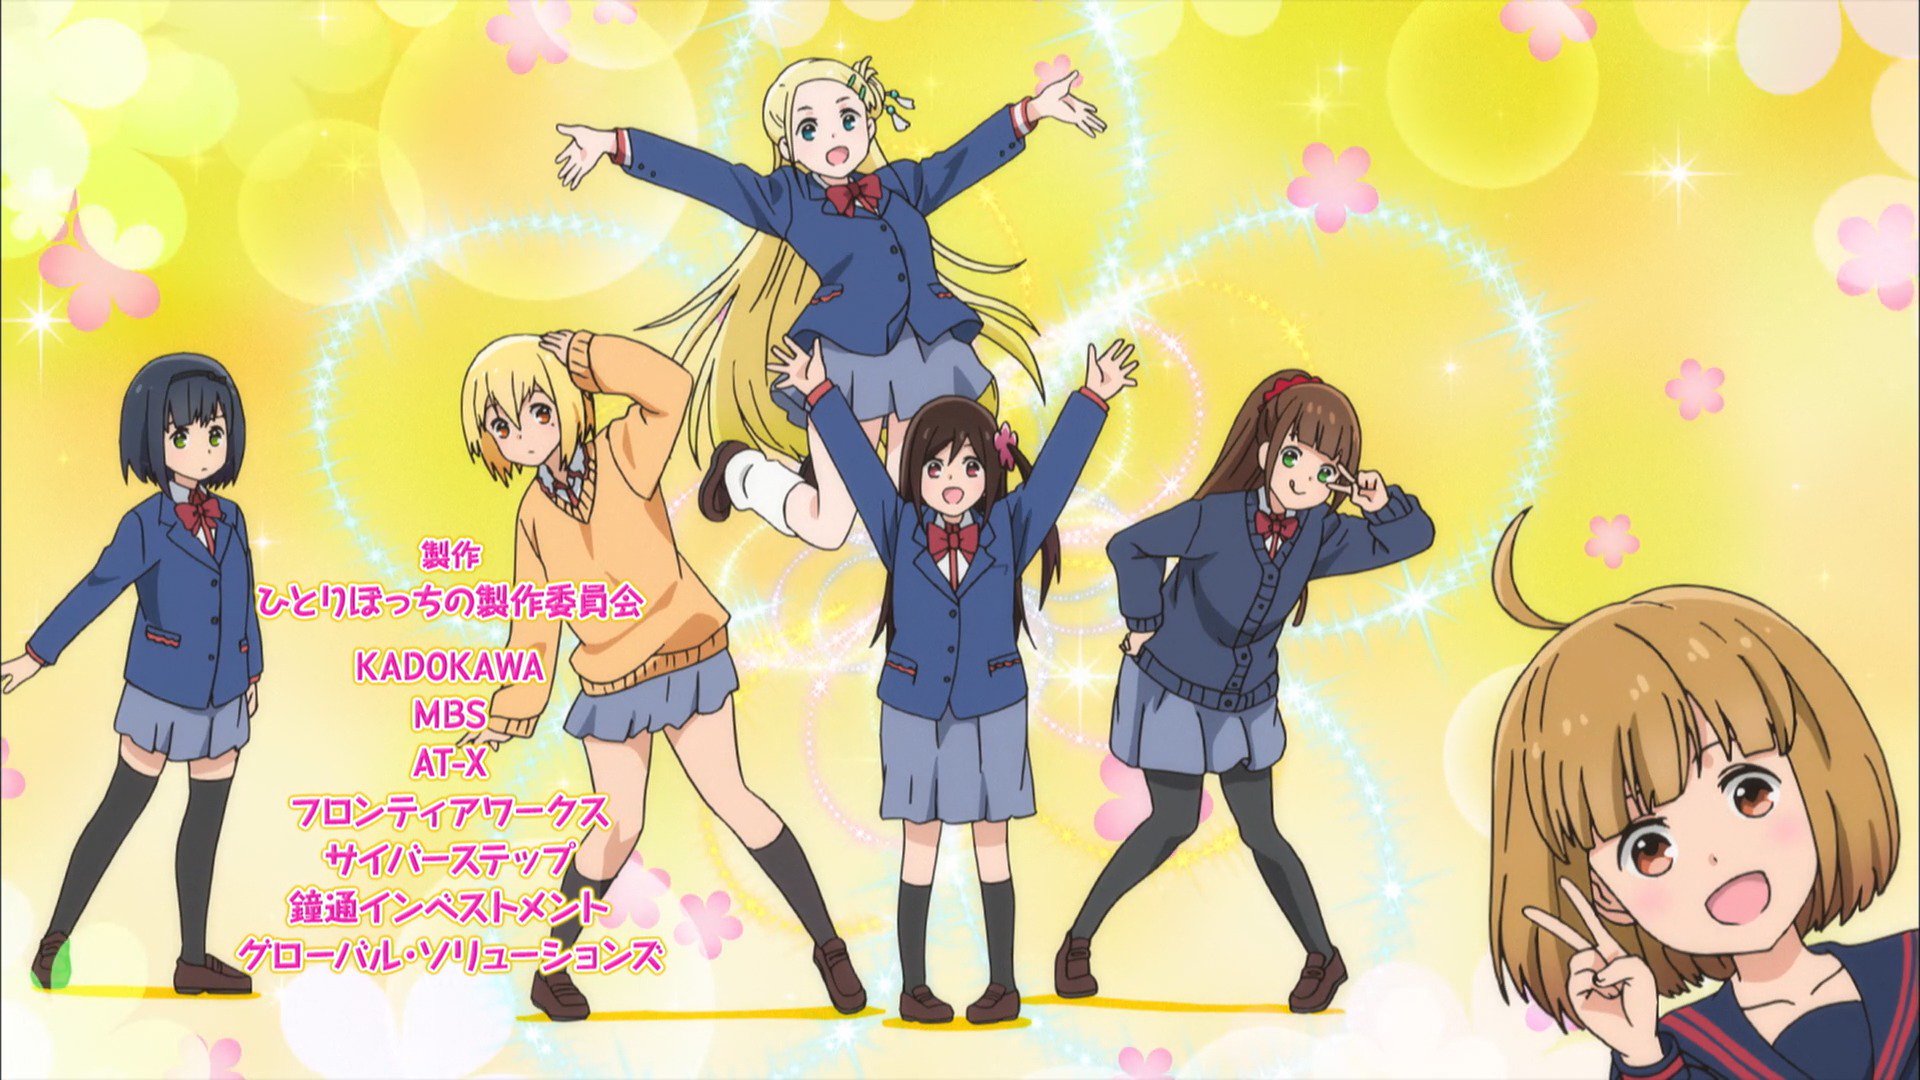 Daiz on X: Bocchi is finally here in anime form and I am super